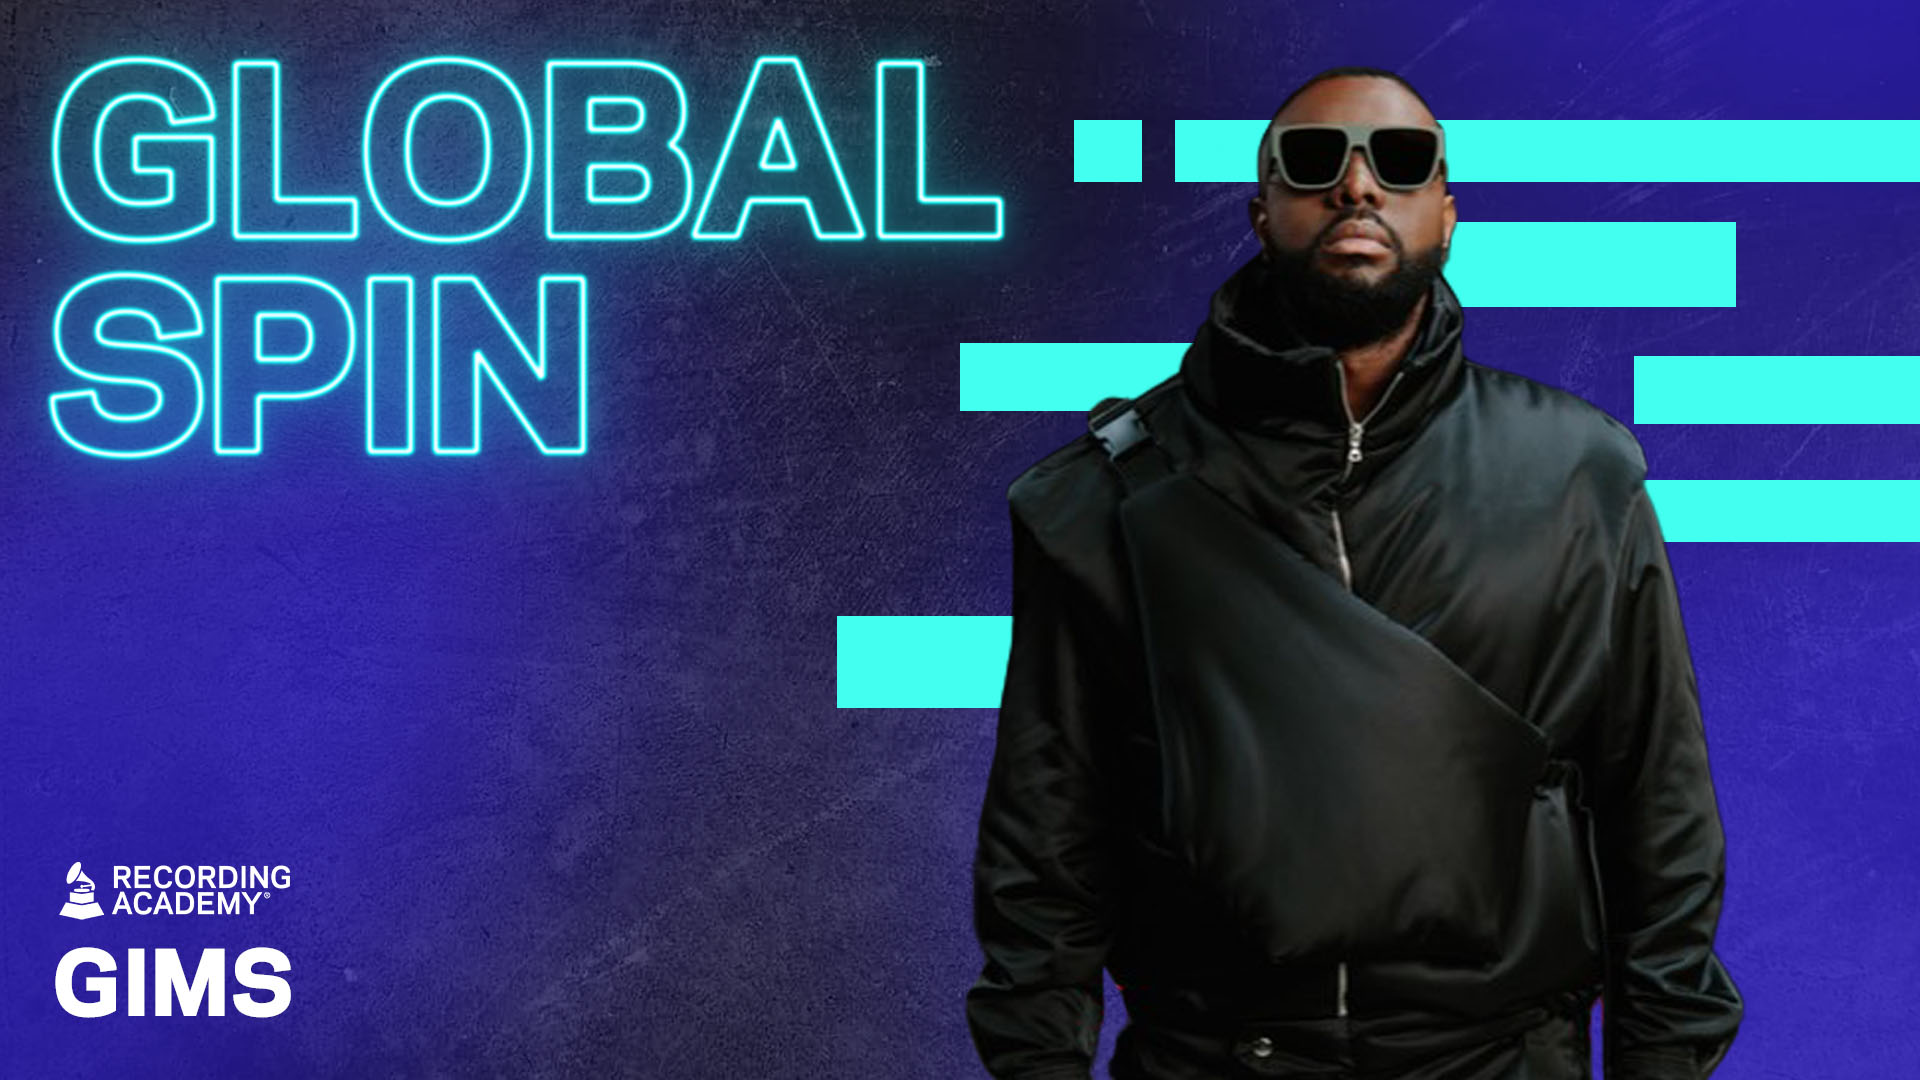 Watch GIMS Deliver A Powerful Performance of "Maintenant" | Global Spin Live